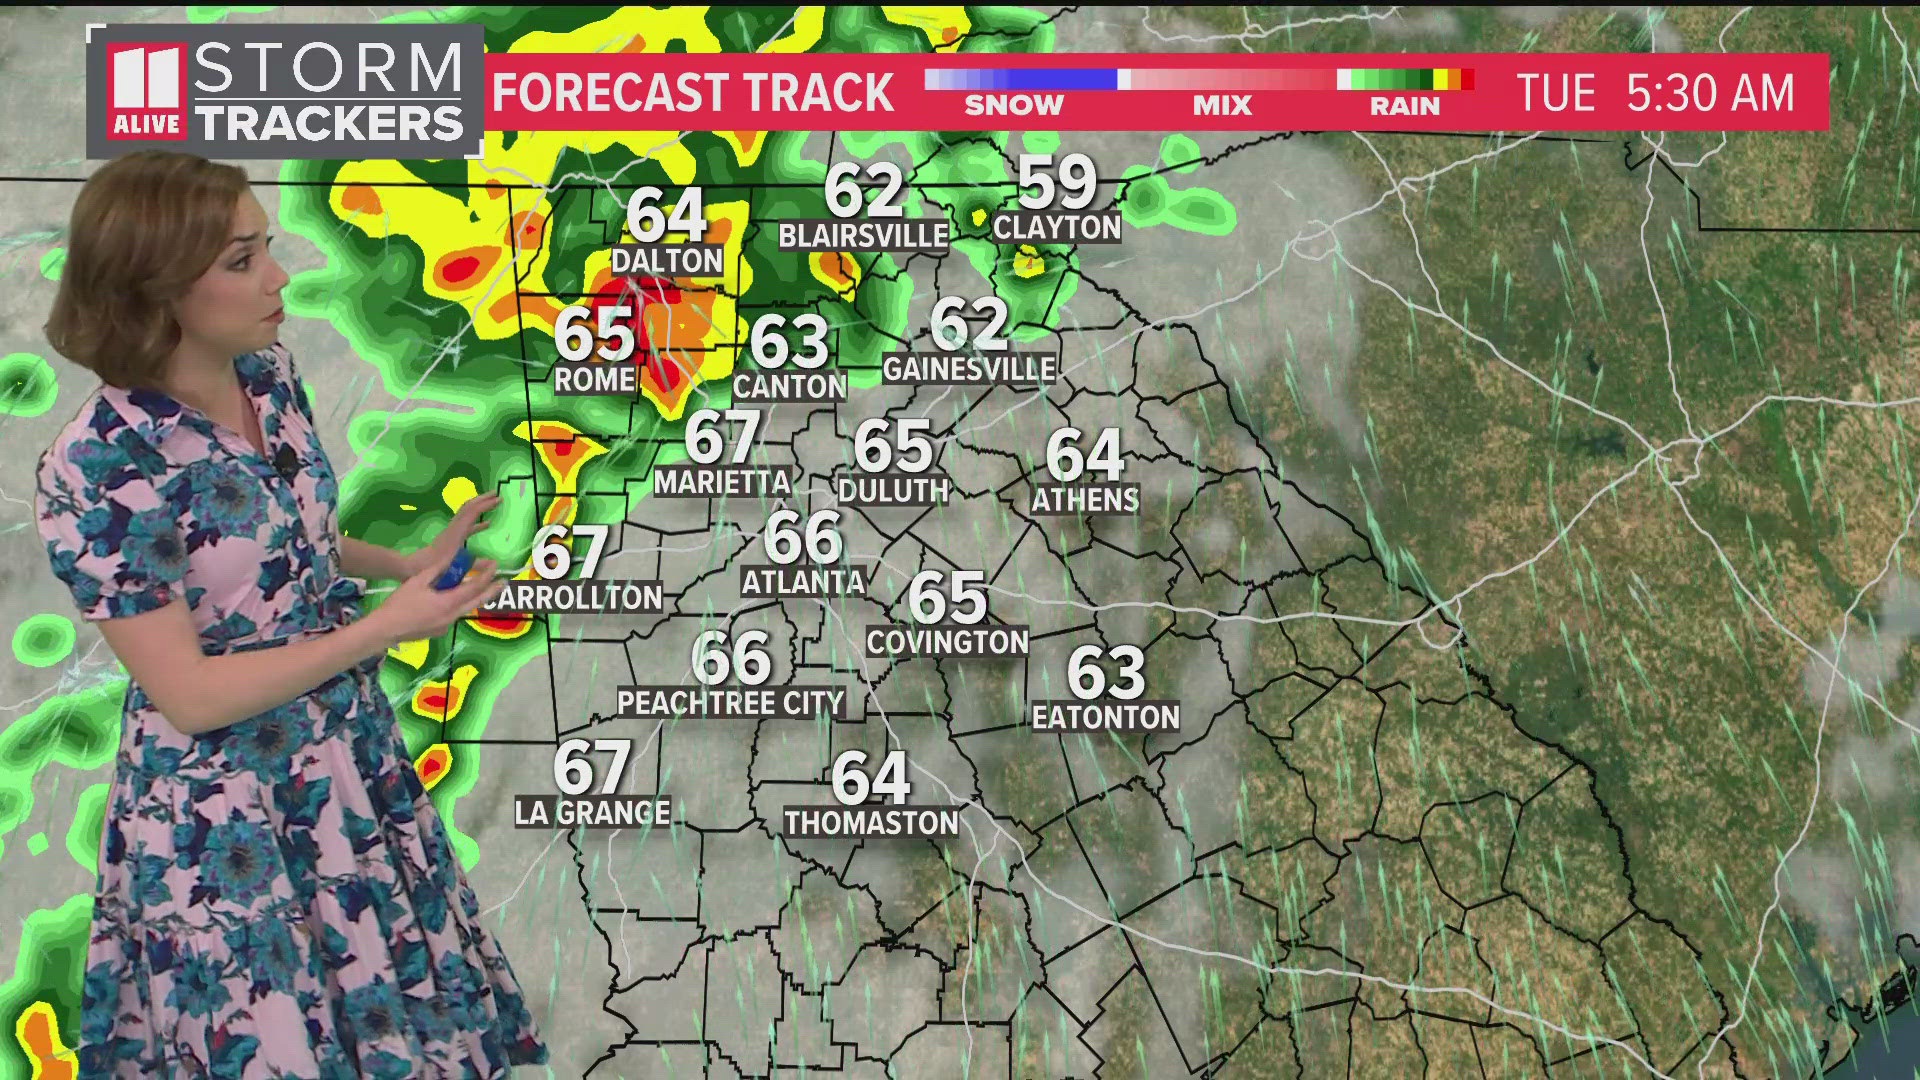 Scattered showers and storms return Tuesday